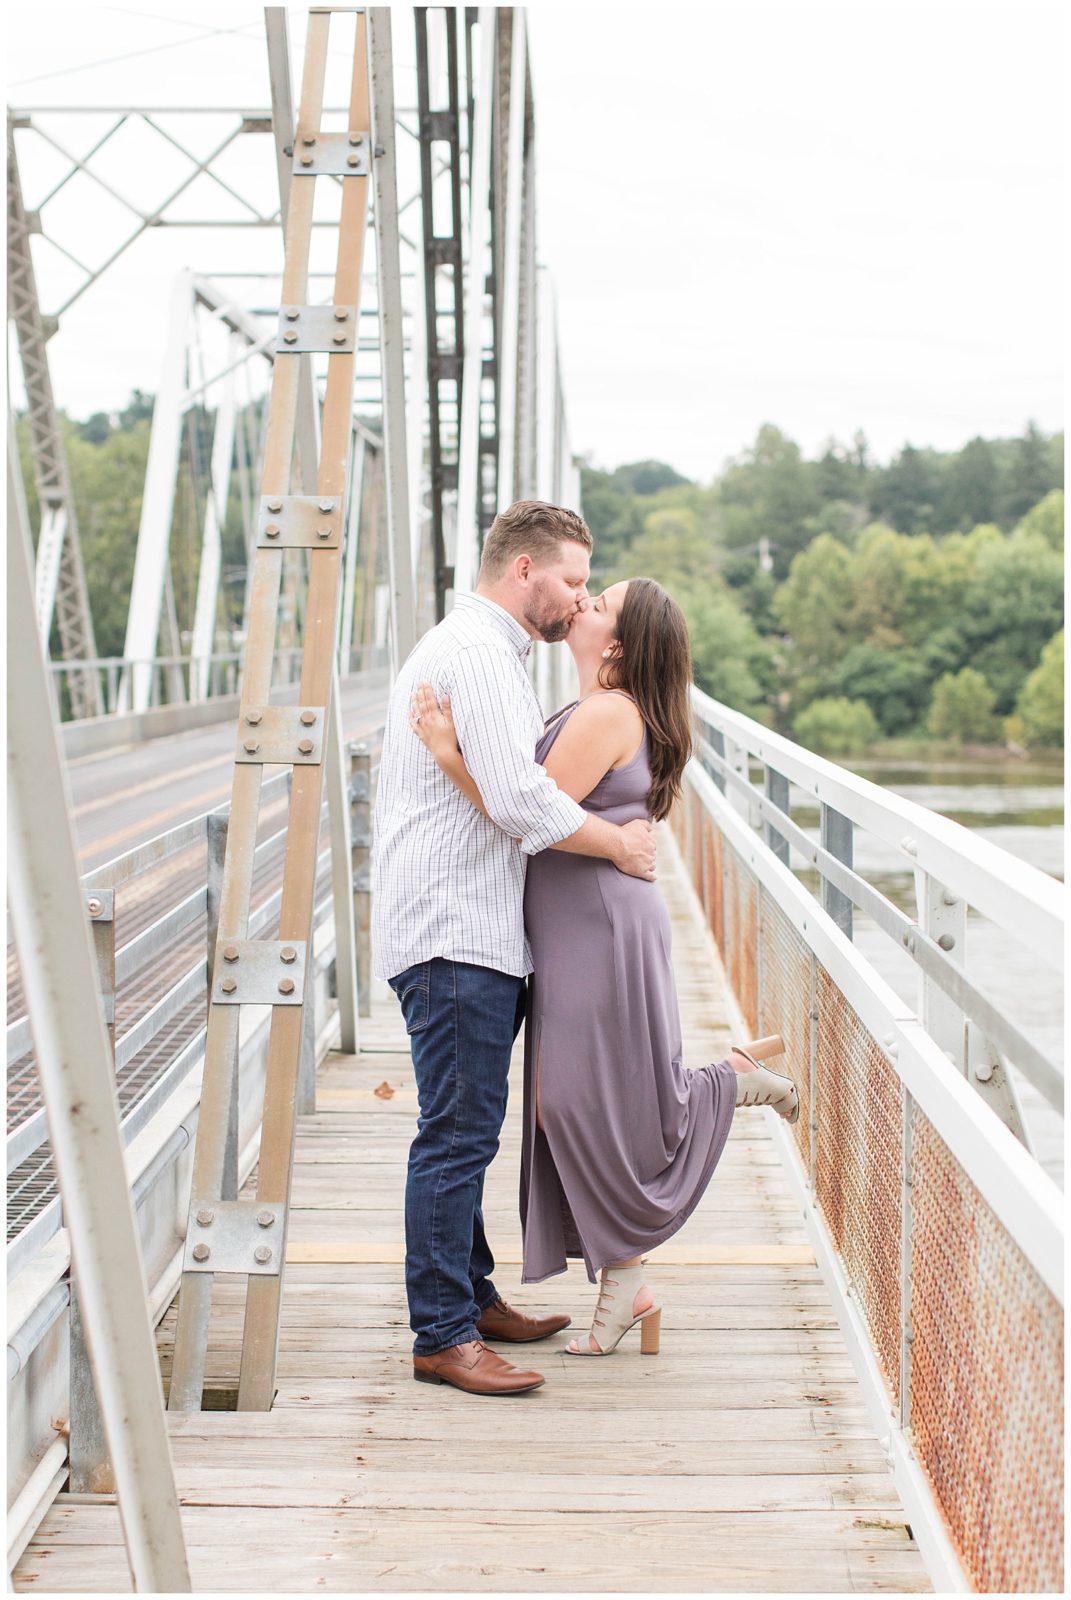 Vicky and Derik's Engagement Session | Washington Crossing Historic Park | Washington Crossing, PA | PA Wedding Photographer | Kelly Pullman Photography | www.KellyPullmanPhotography.com